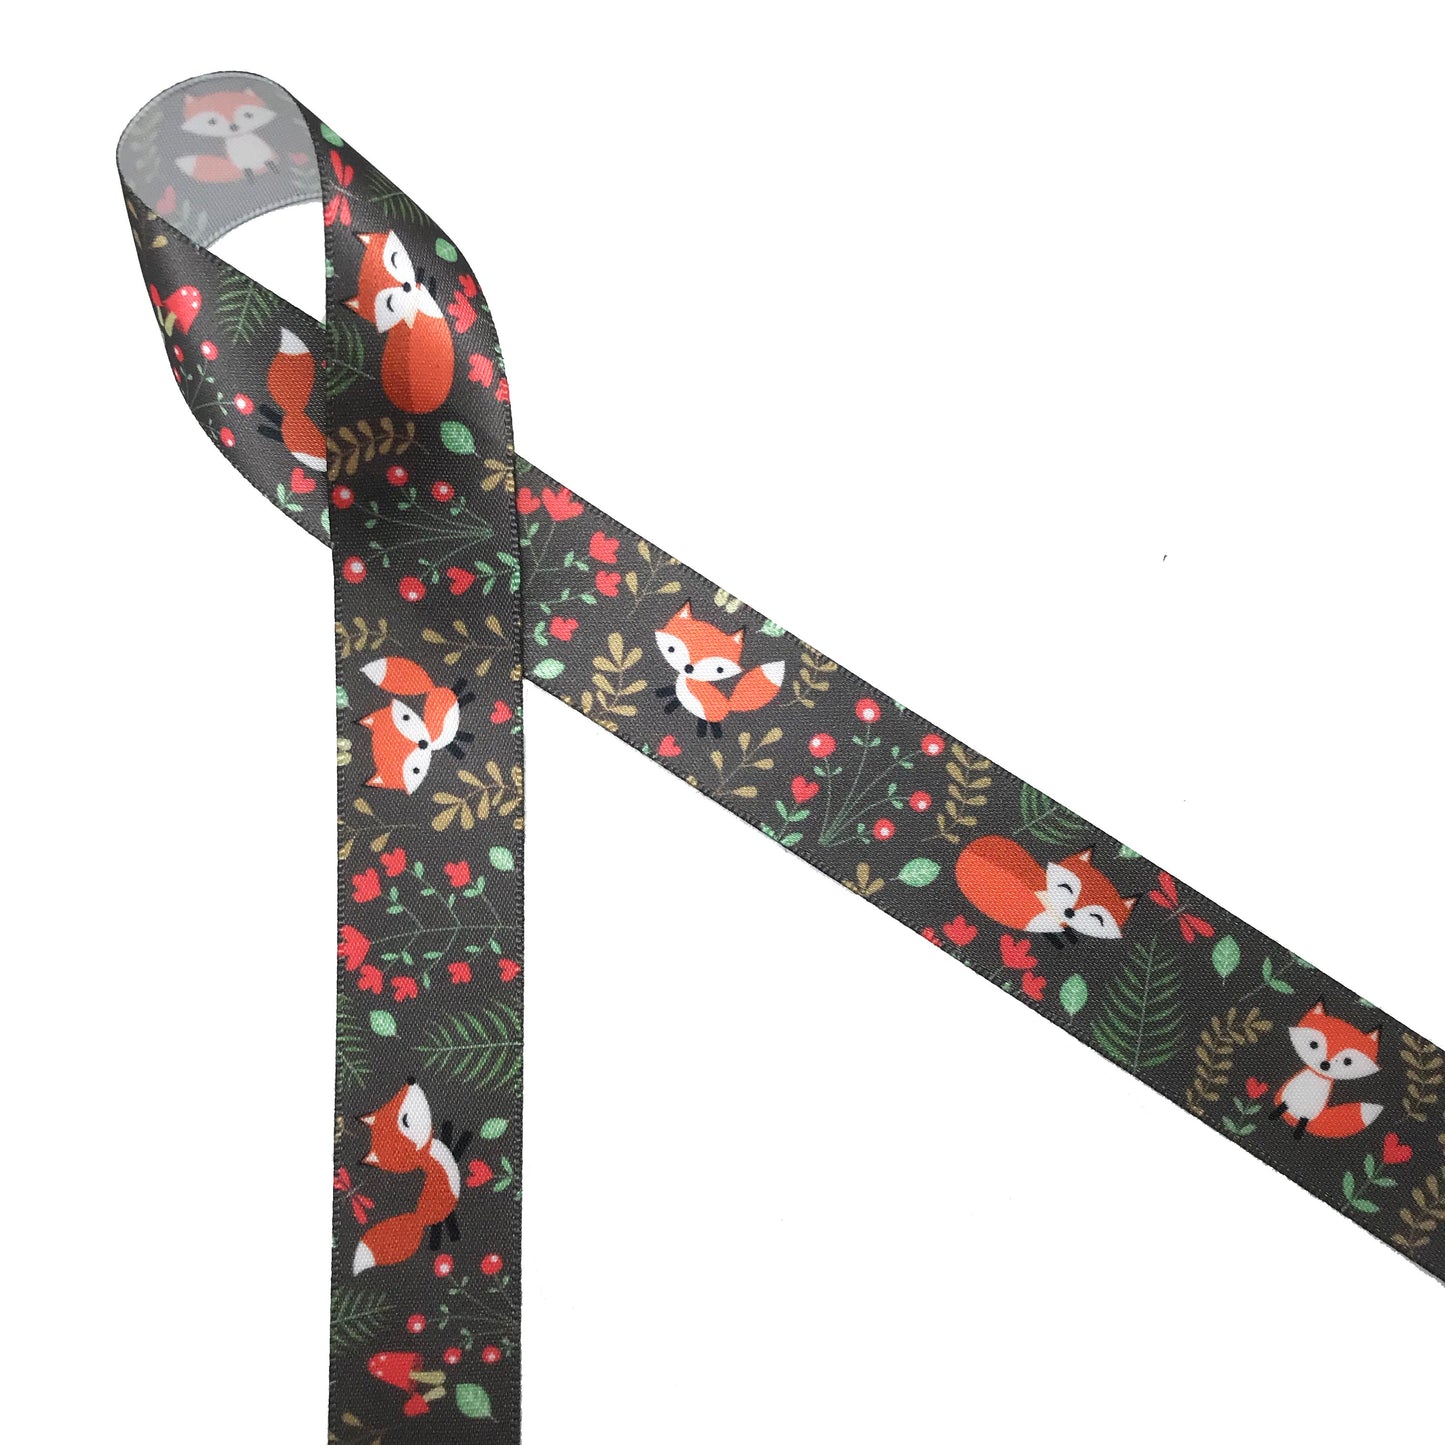 Woodland Fox ribbon with red flowers and fern on a dark green background printed on  7/8" and 1.5" white single face satin ribbon